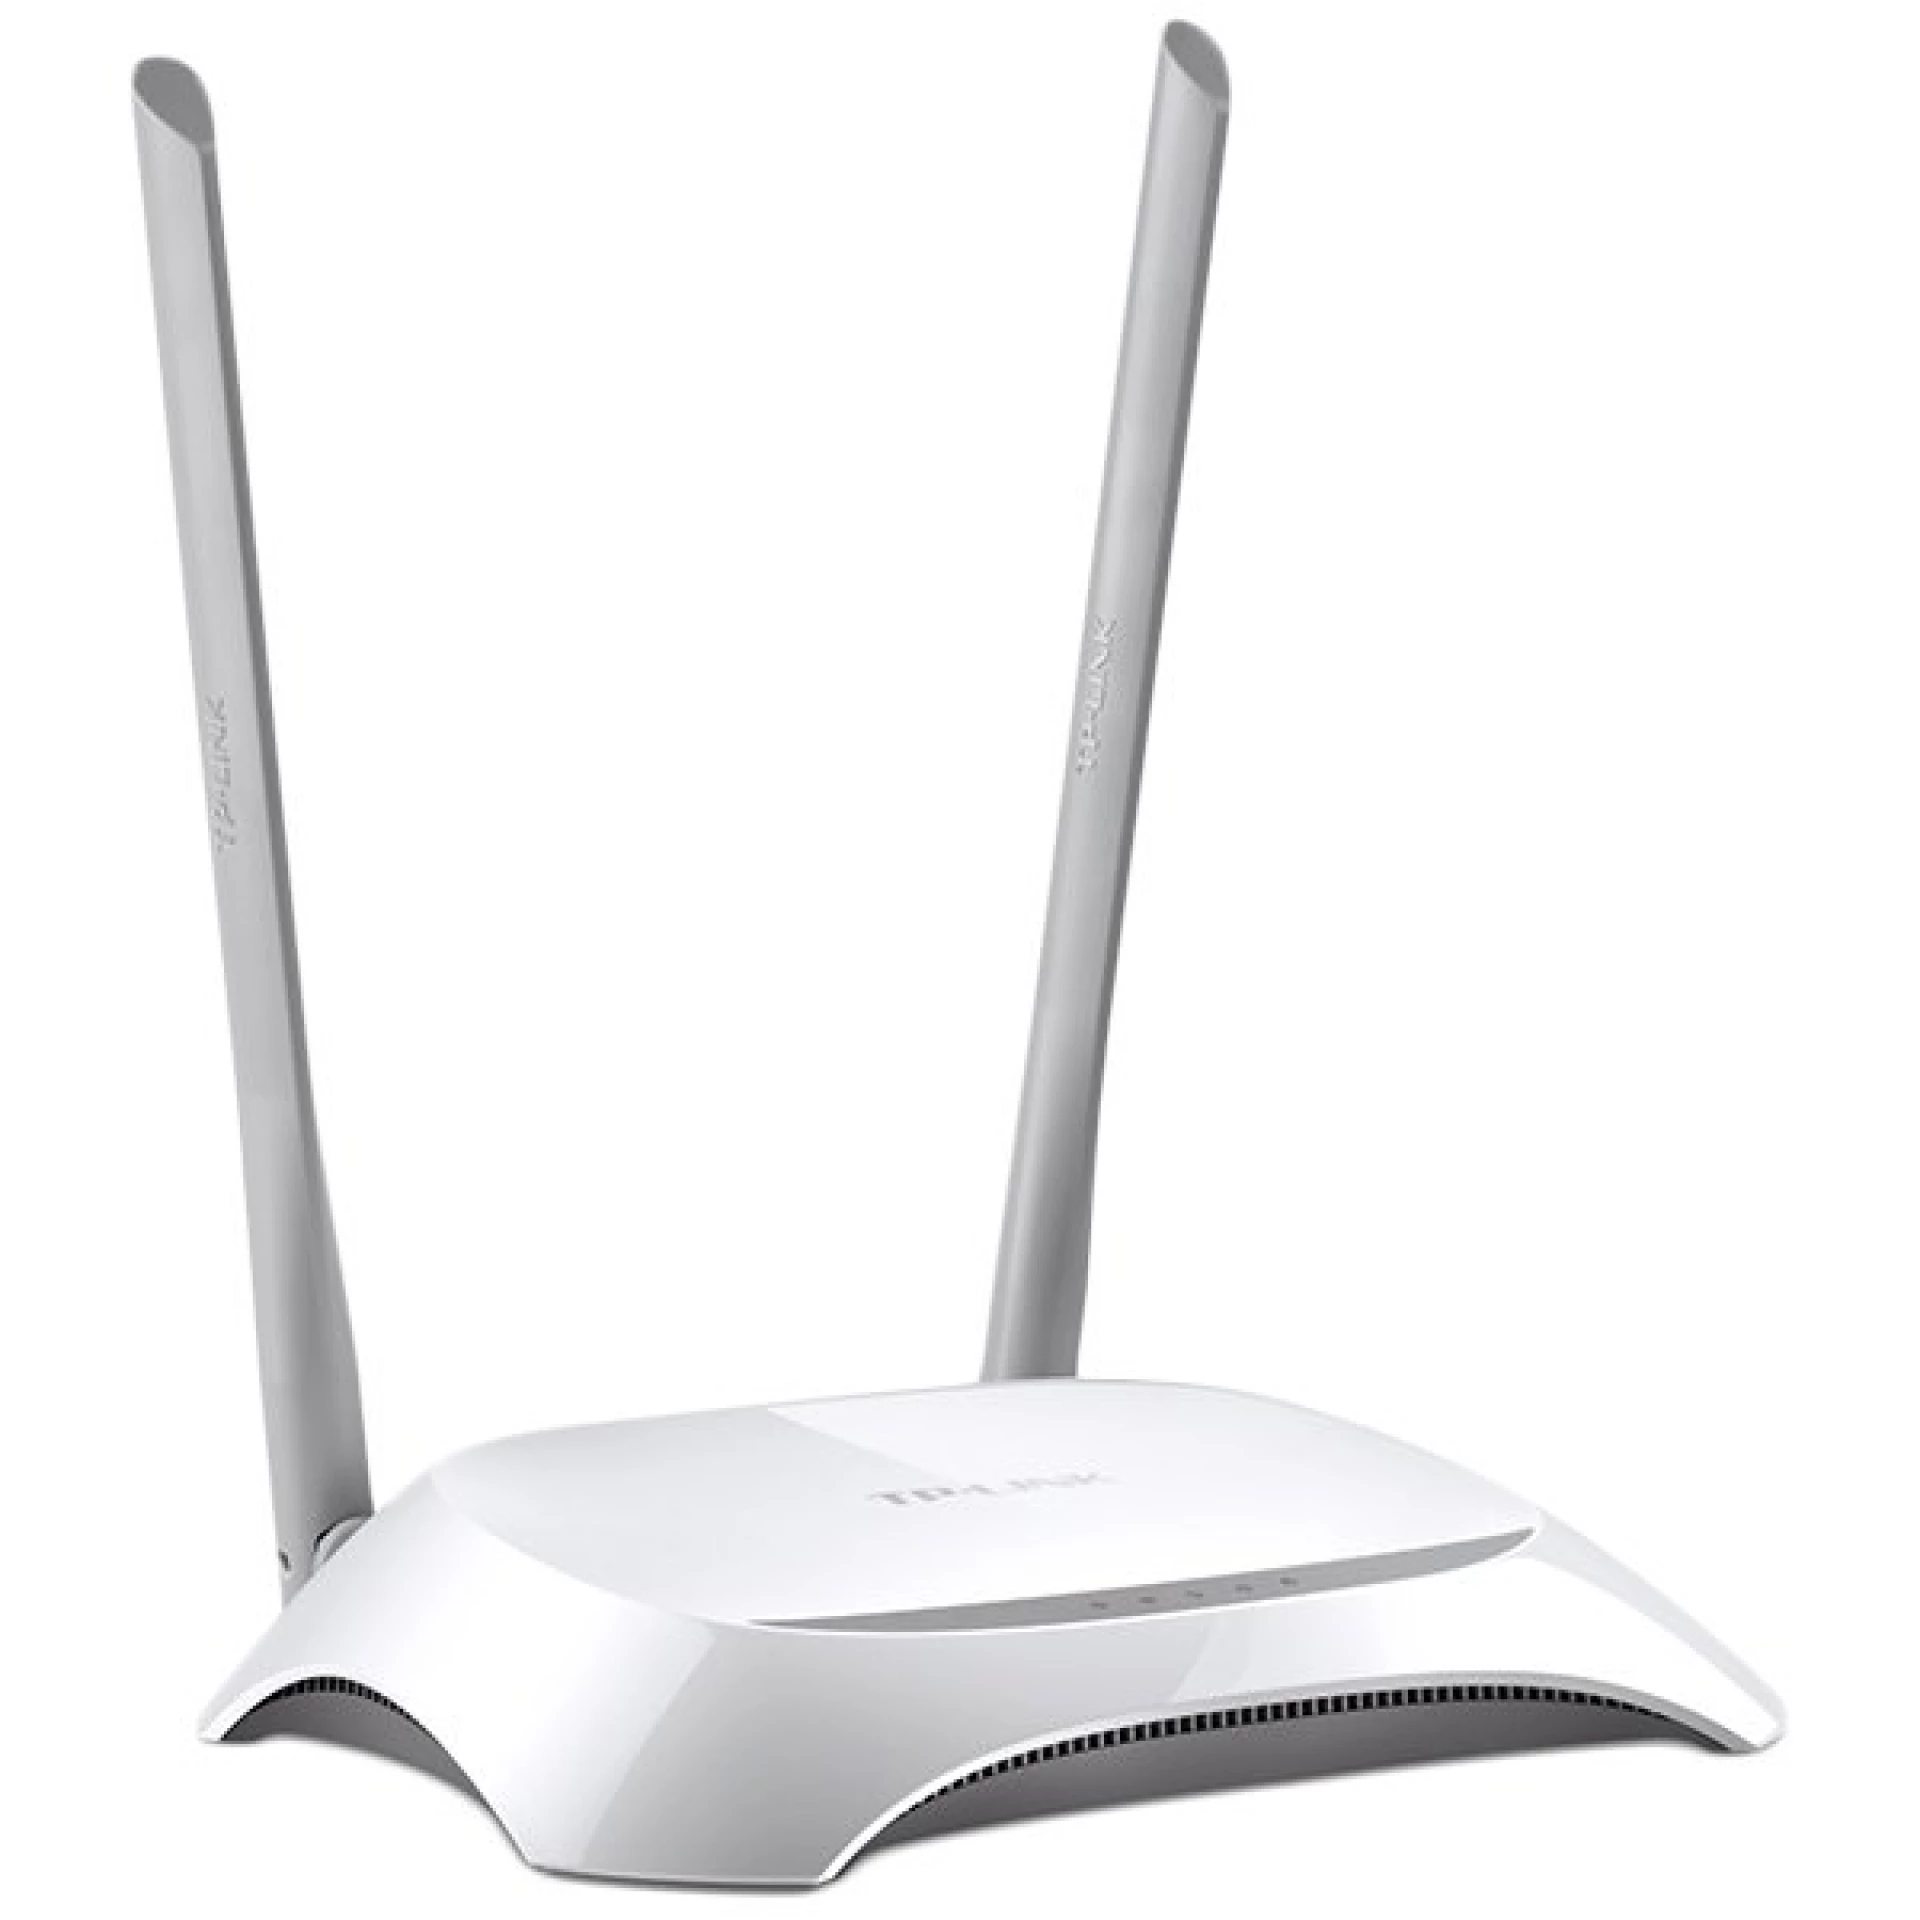 TP-Link TL-WR840N wireless router